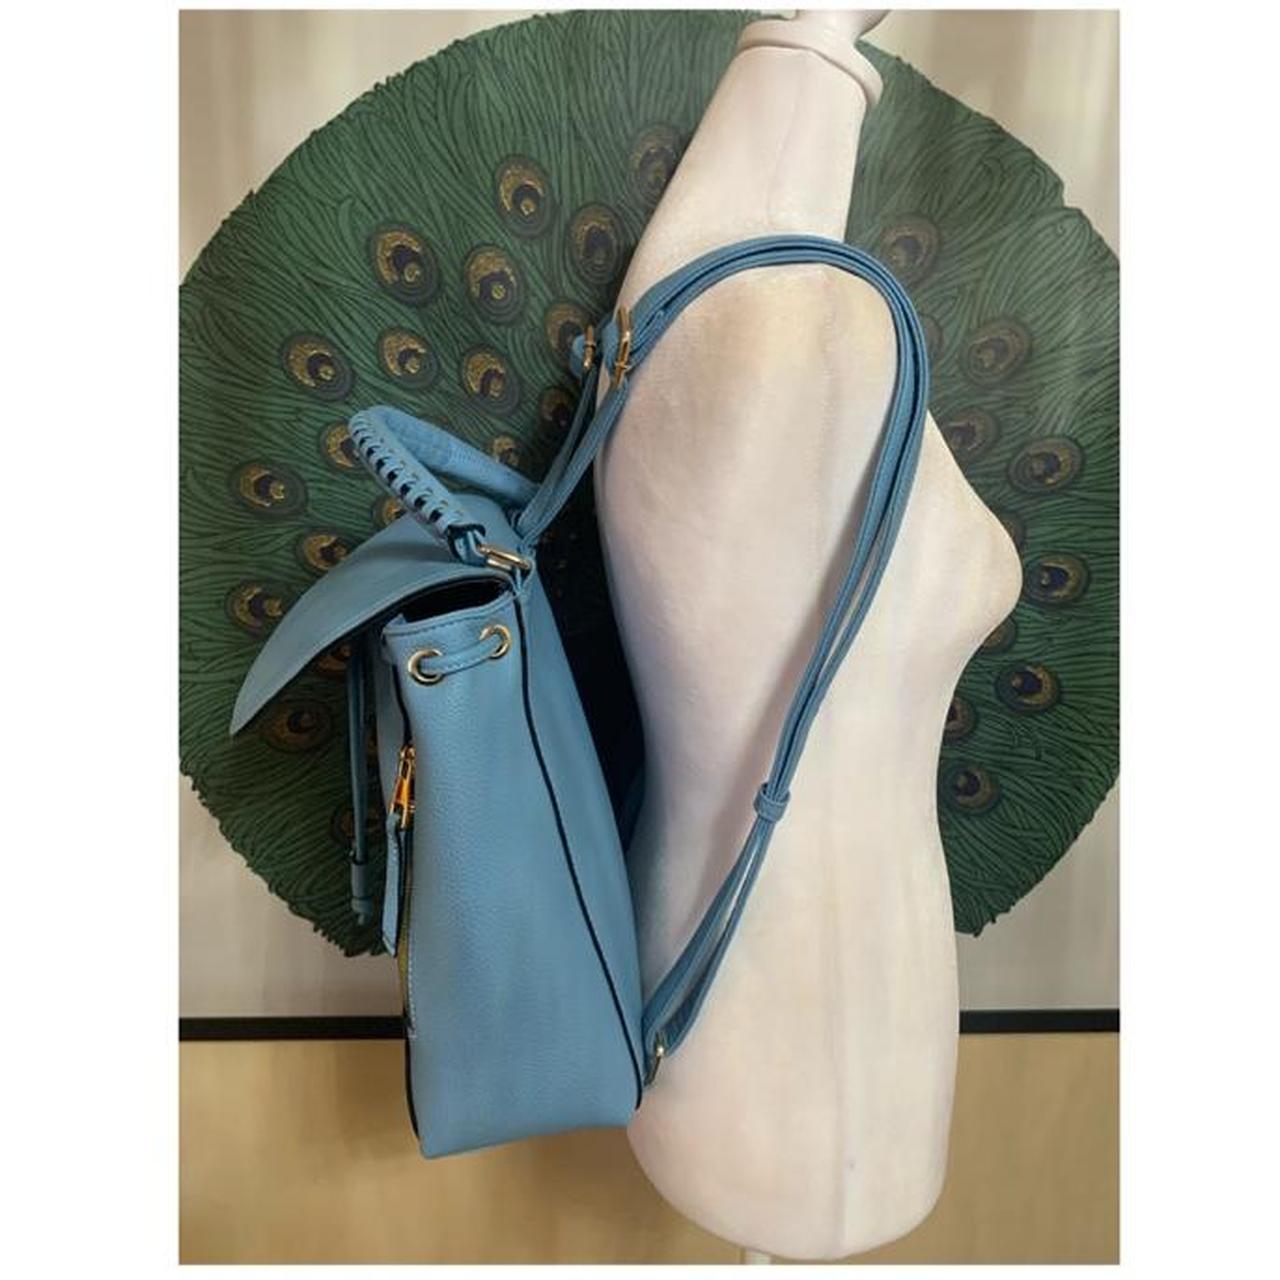 Robins Egg Blue Backpack , BRAND NEW Perfect for the